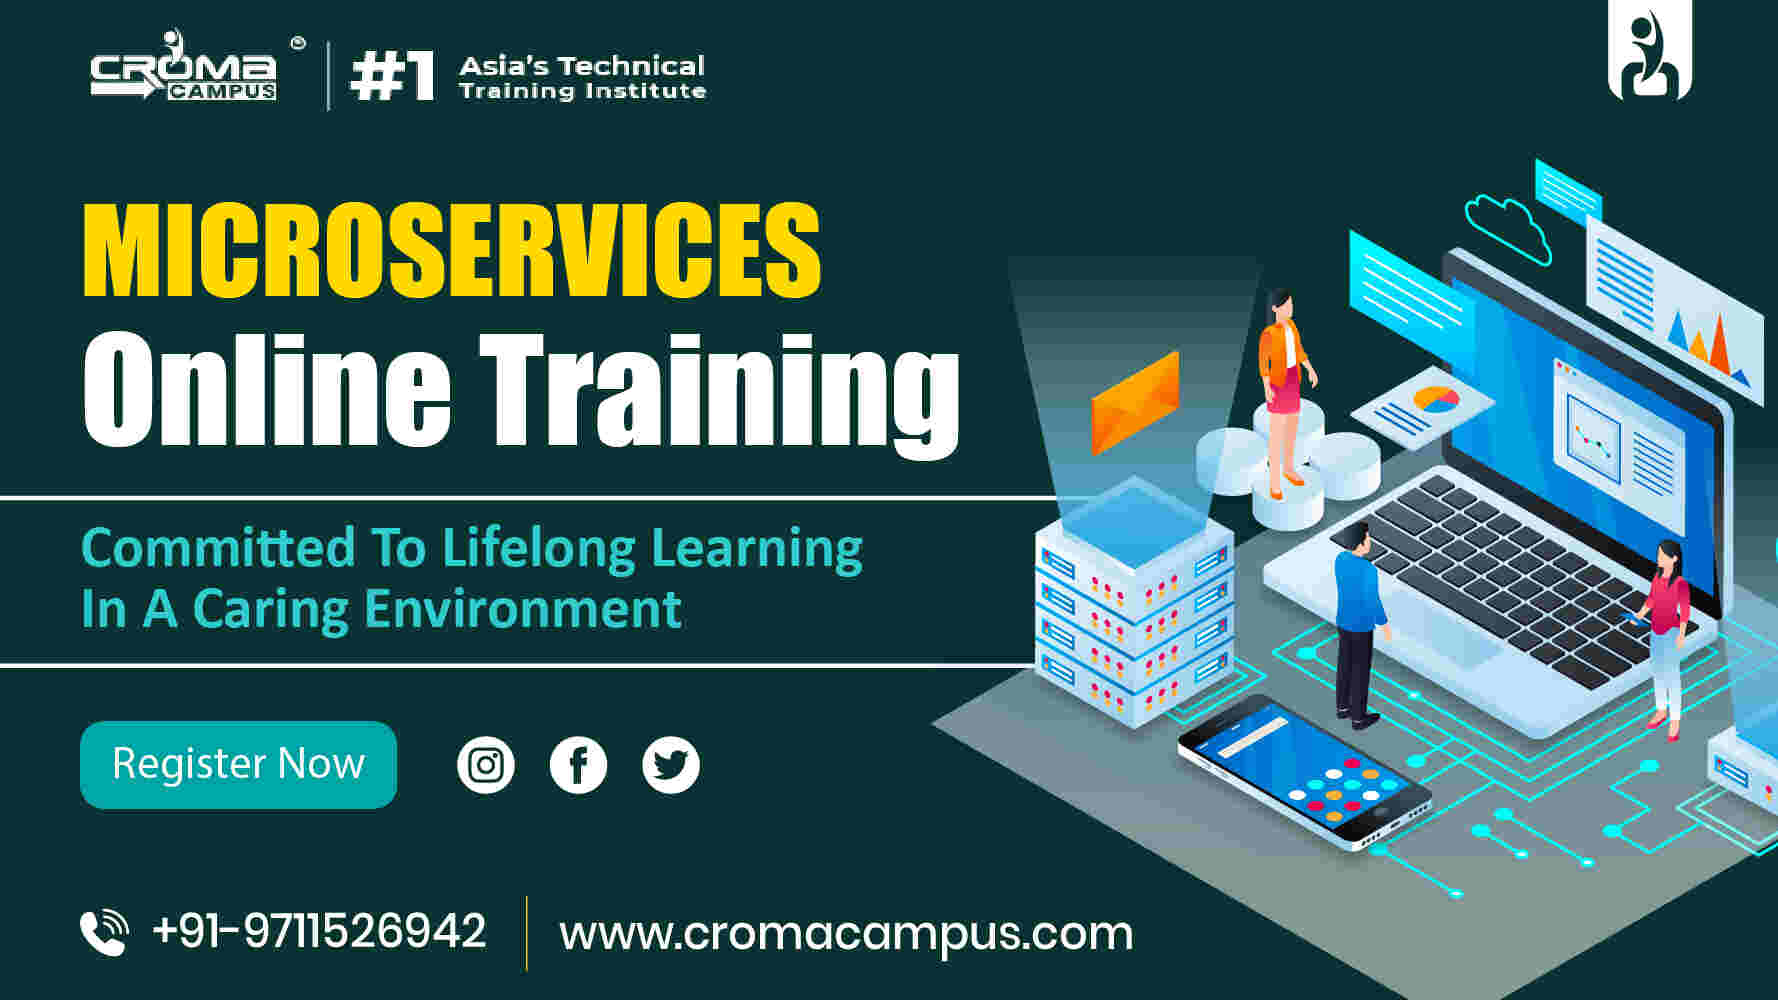 MICROSERVICES ONLINE TRAINING-01-f4e1aa4d